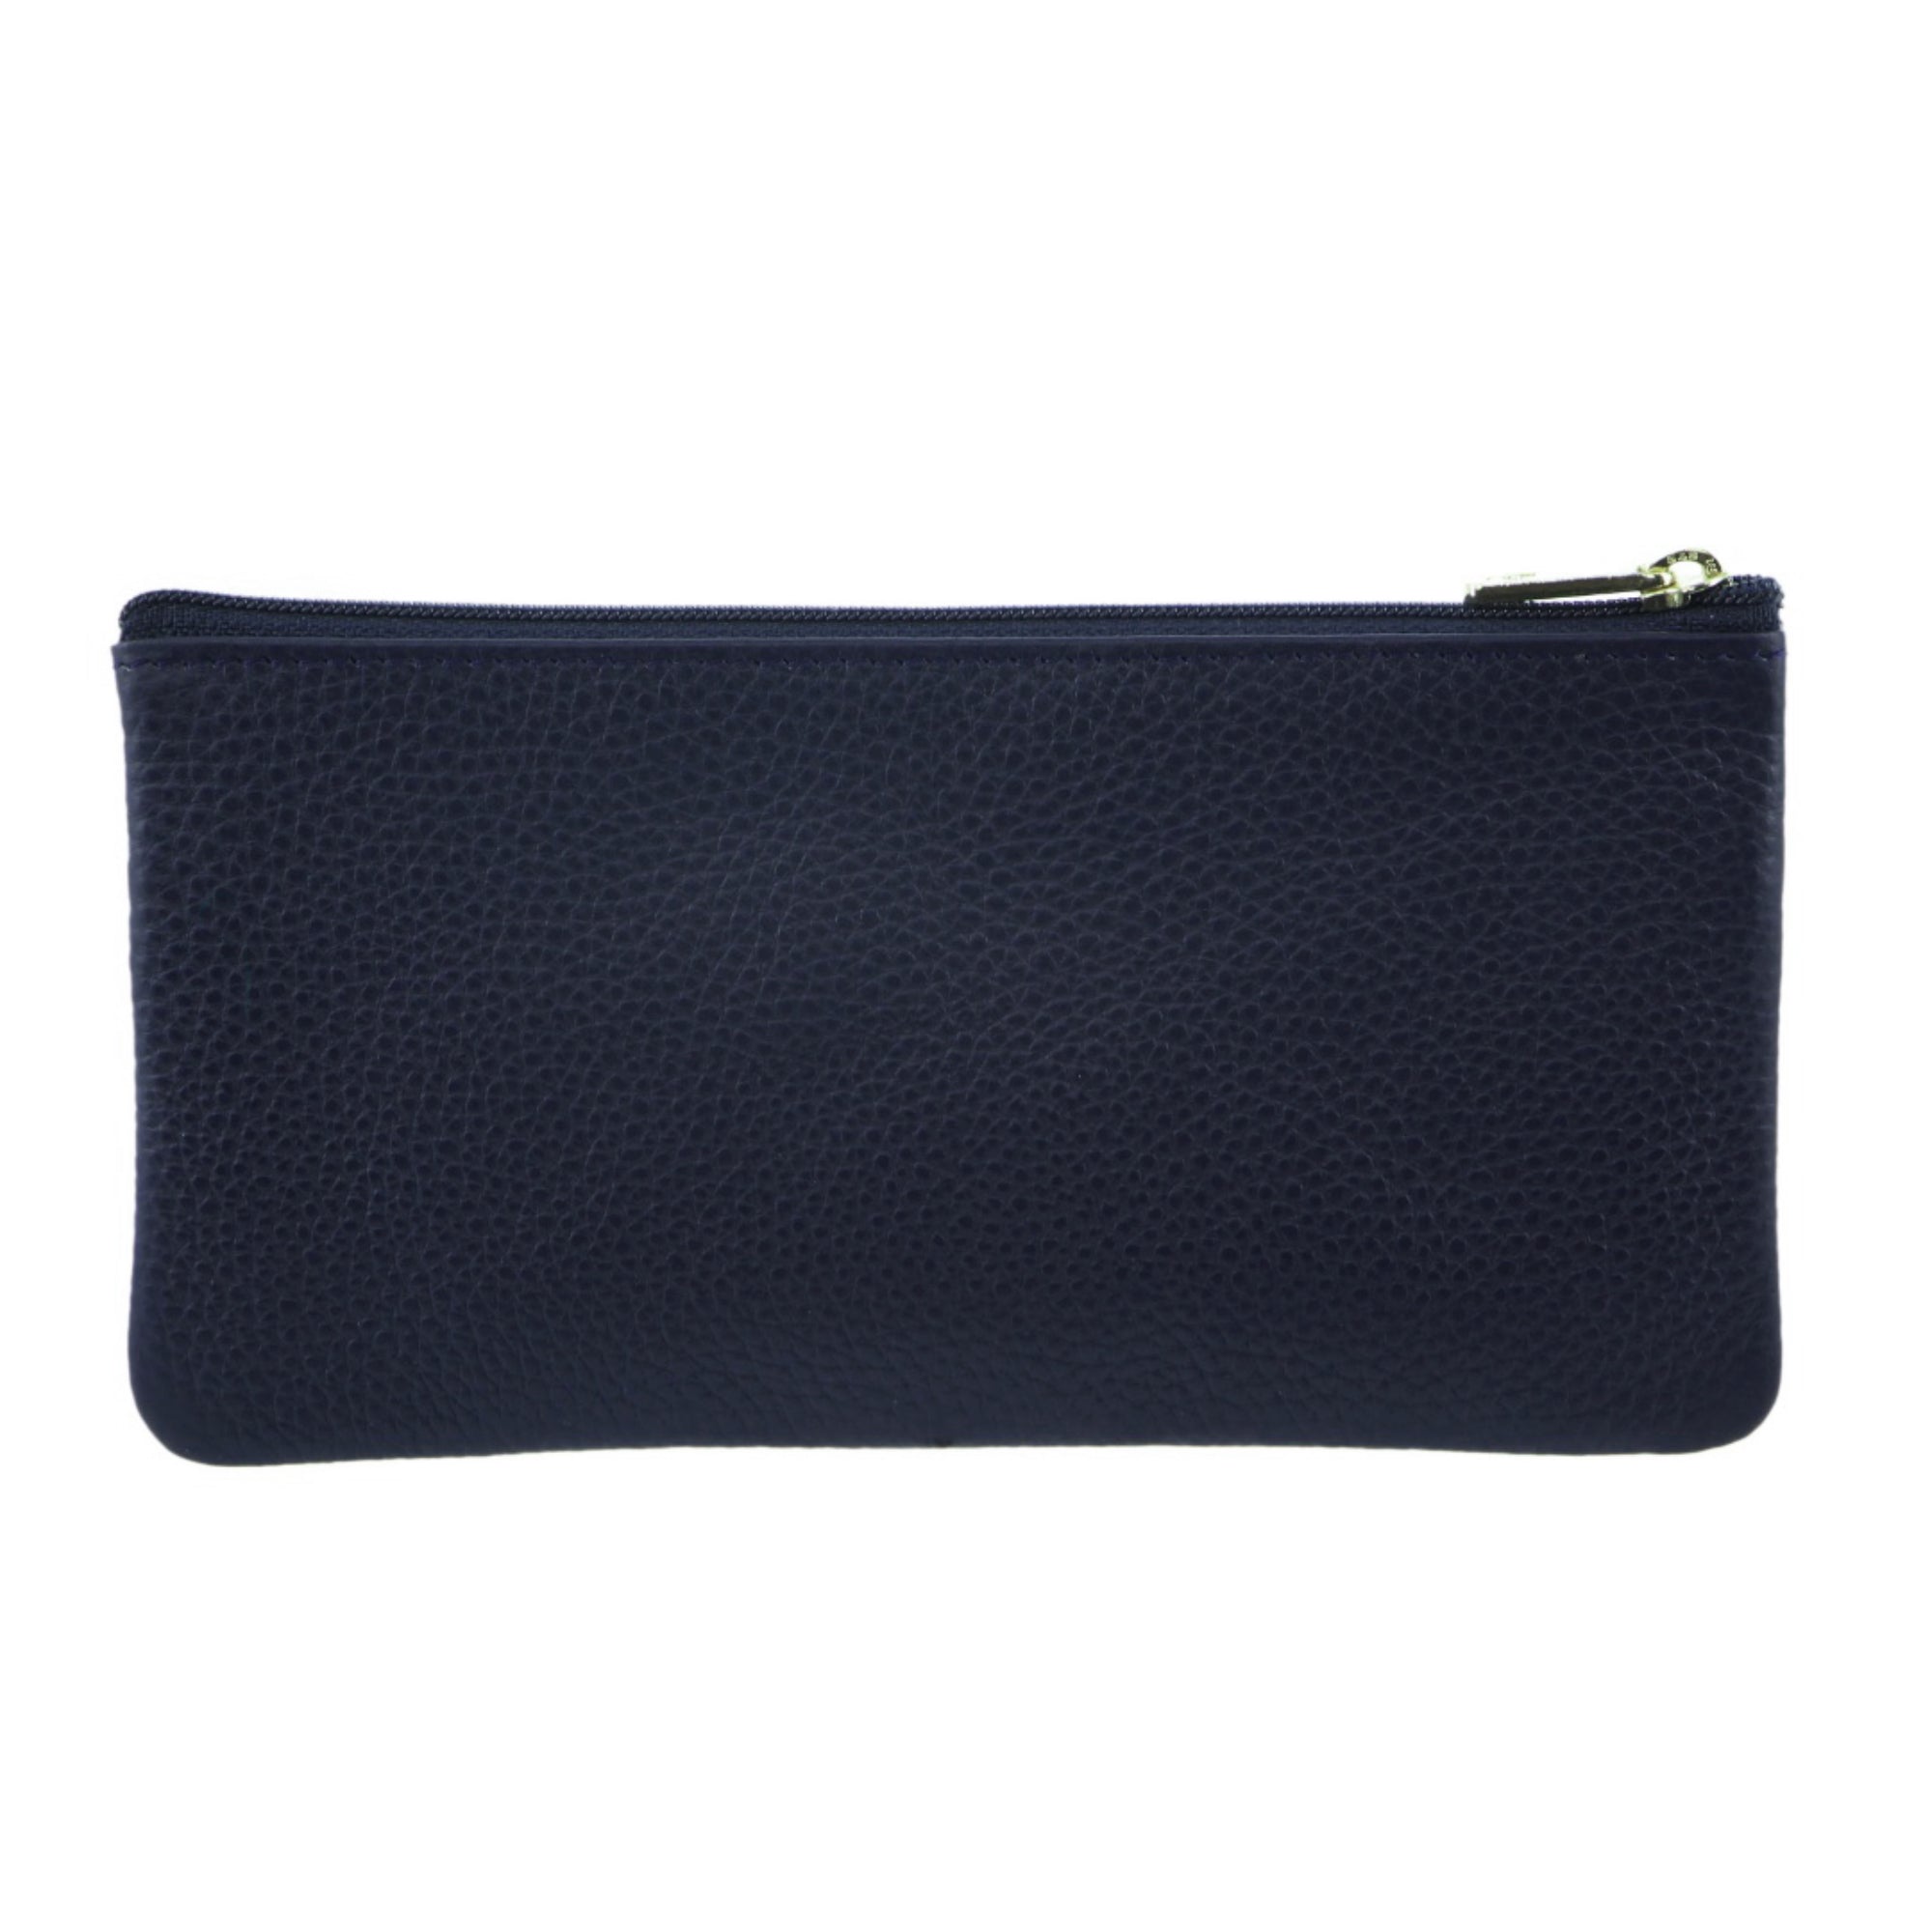 Pierre Cardin Leather Coin Purse/Phone Wallet Case in Navy